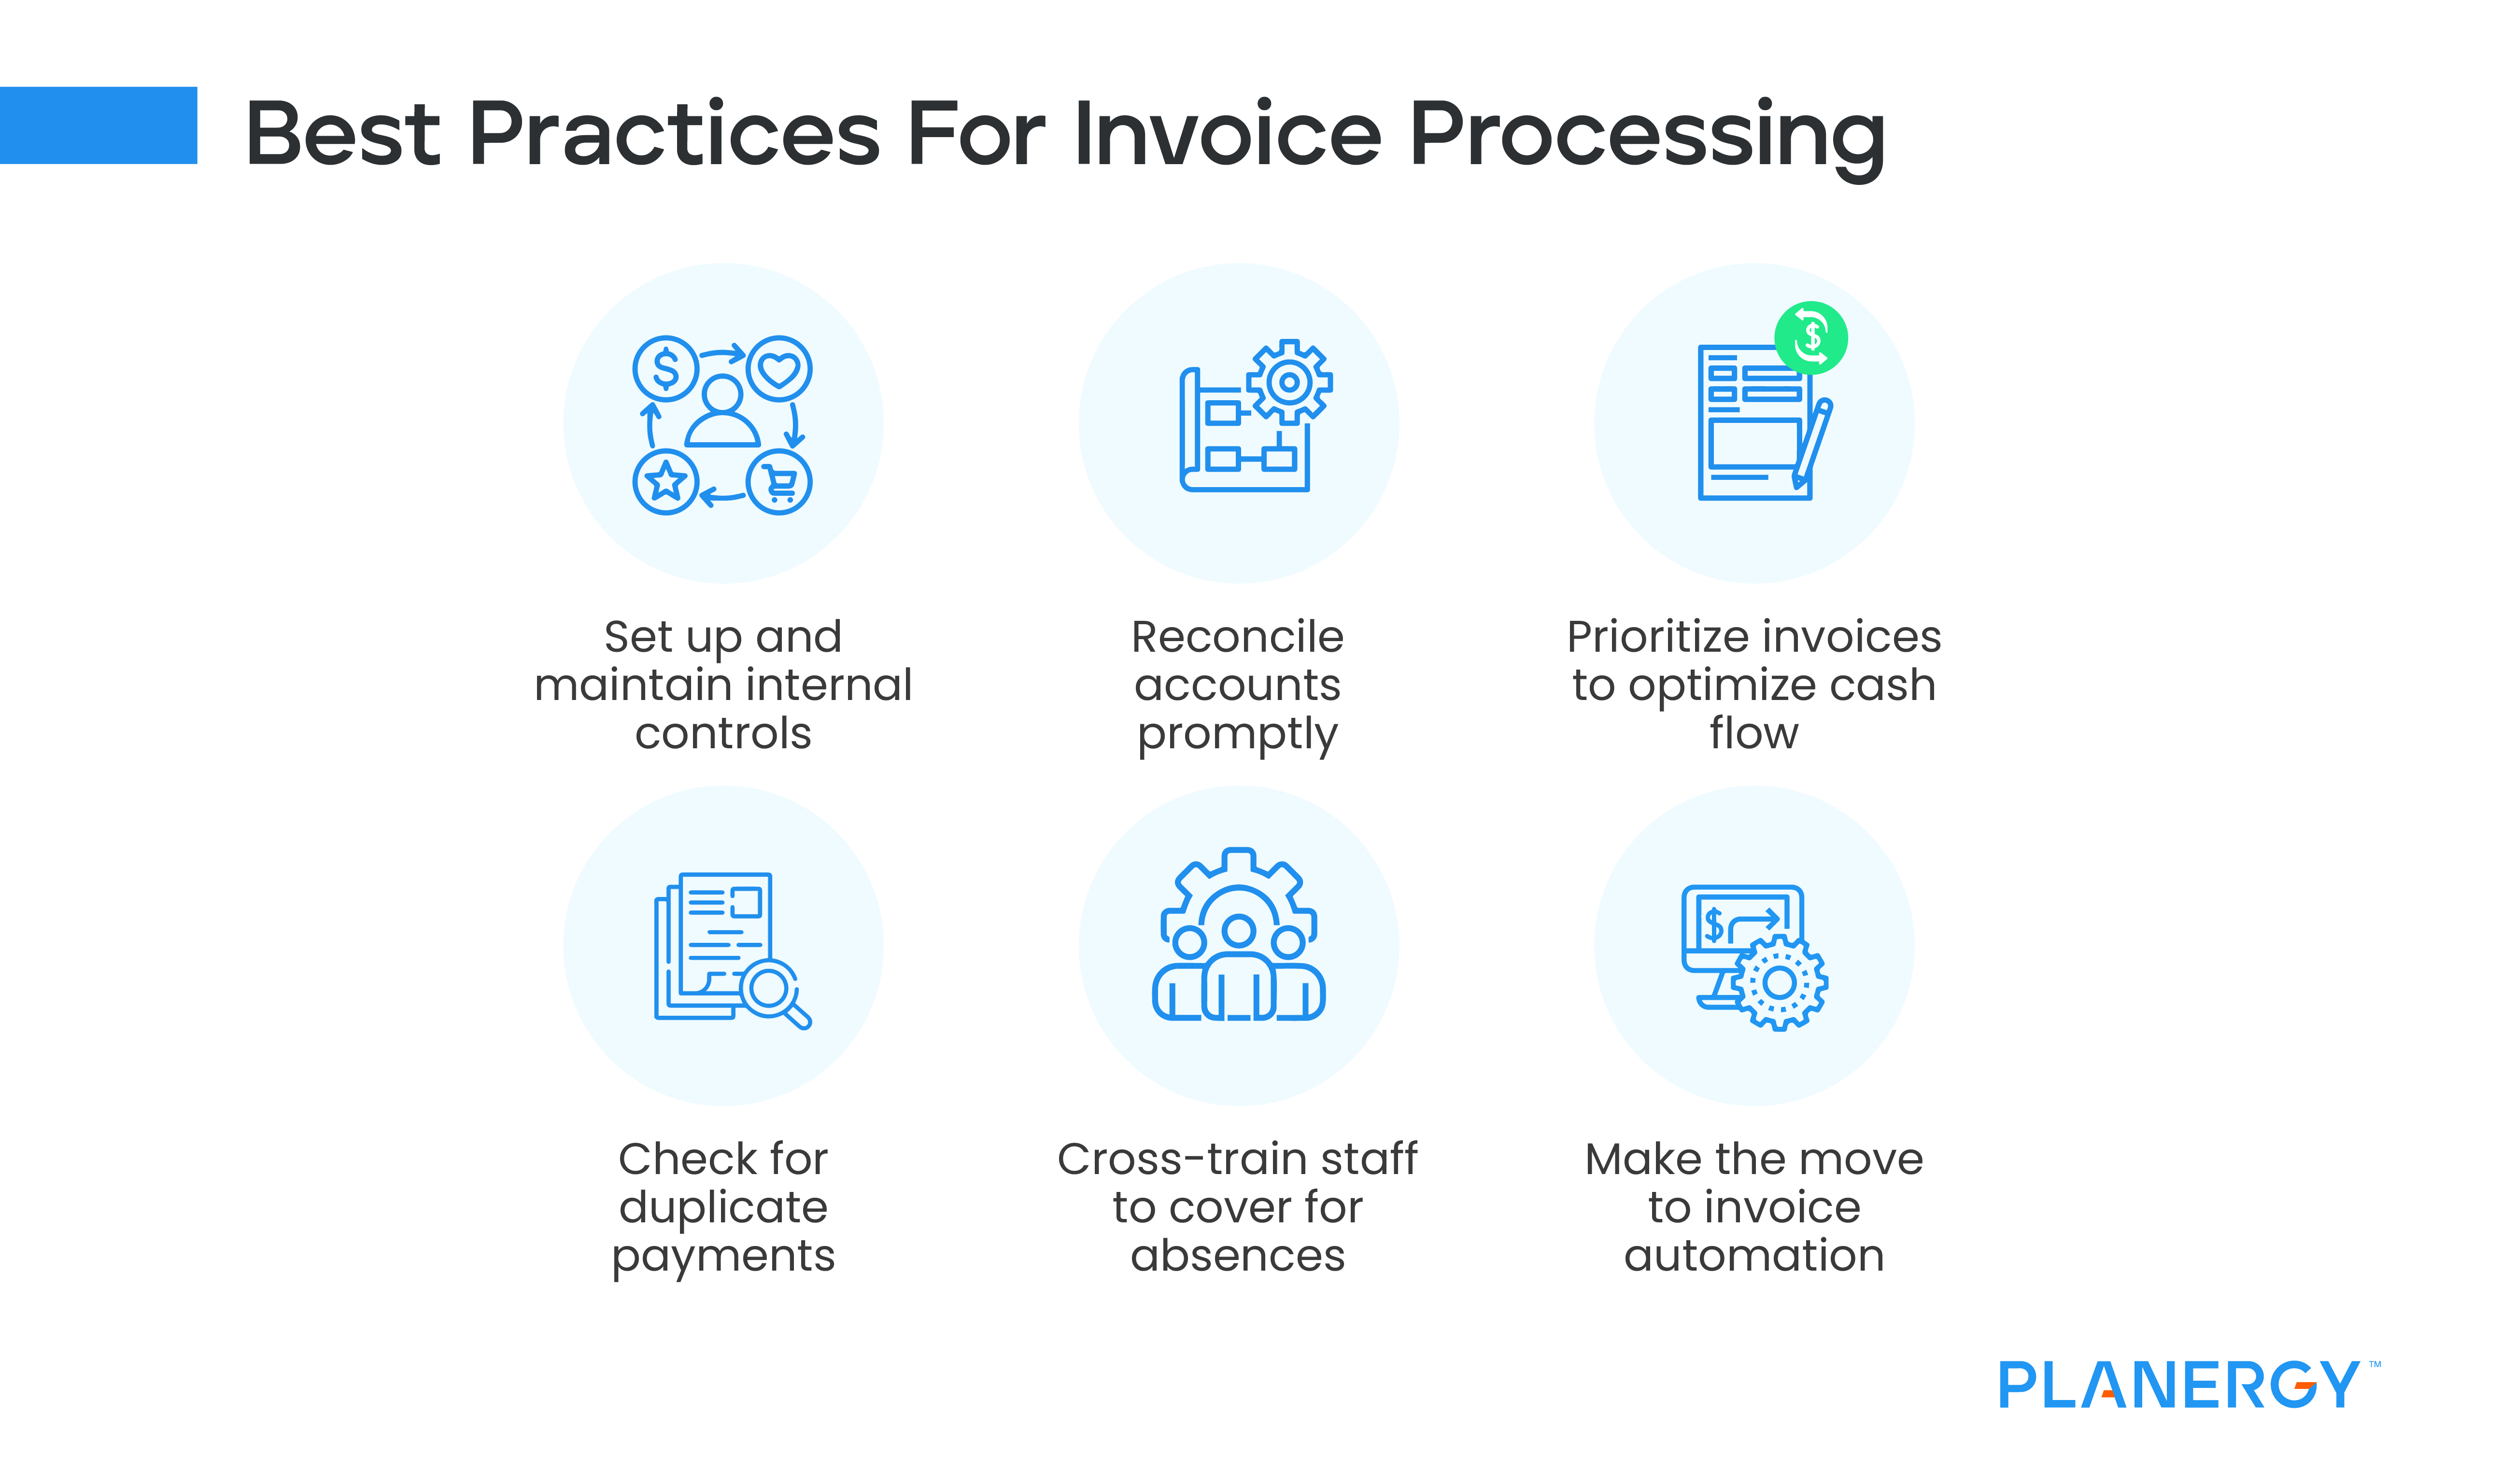 Best Practices for Invoice Processing